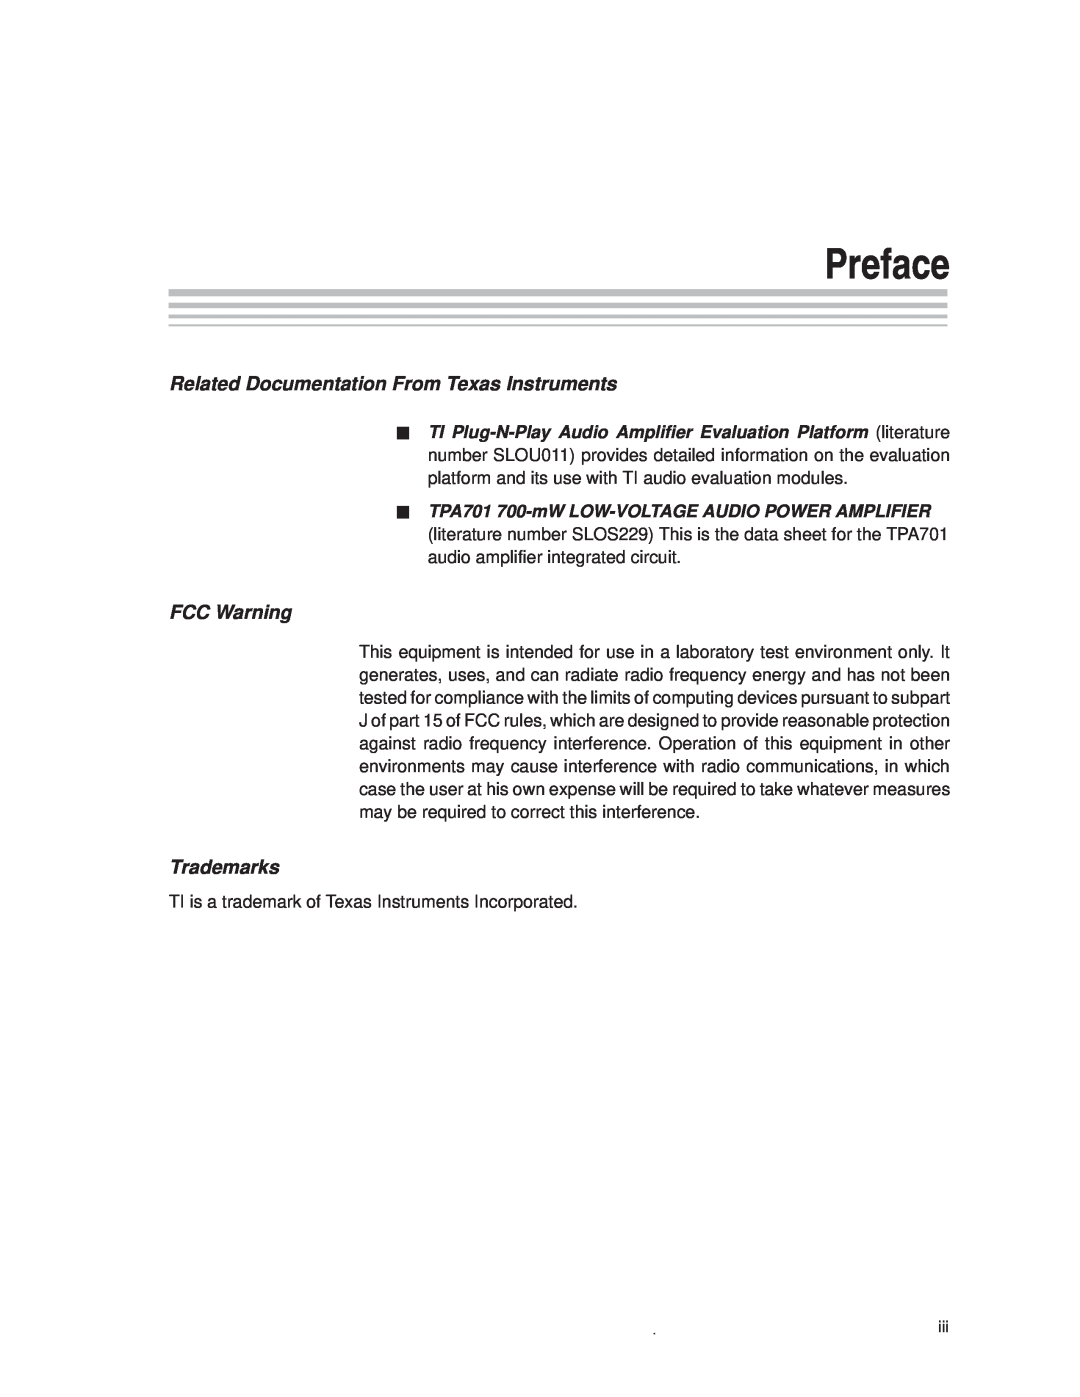 Texas Instruments TPA701 manual Preface, Related Documentation From Texas Instruments, FCC Warning, Trademarks 